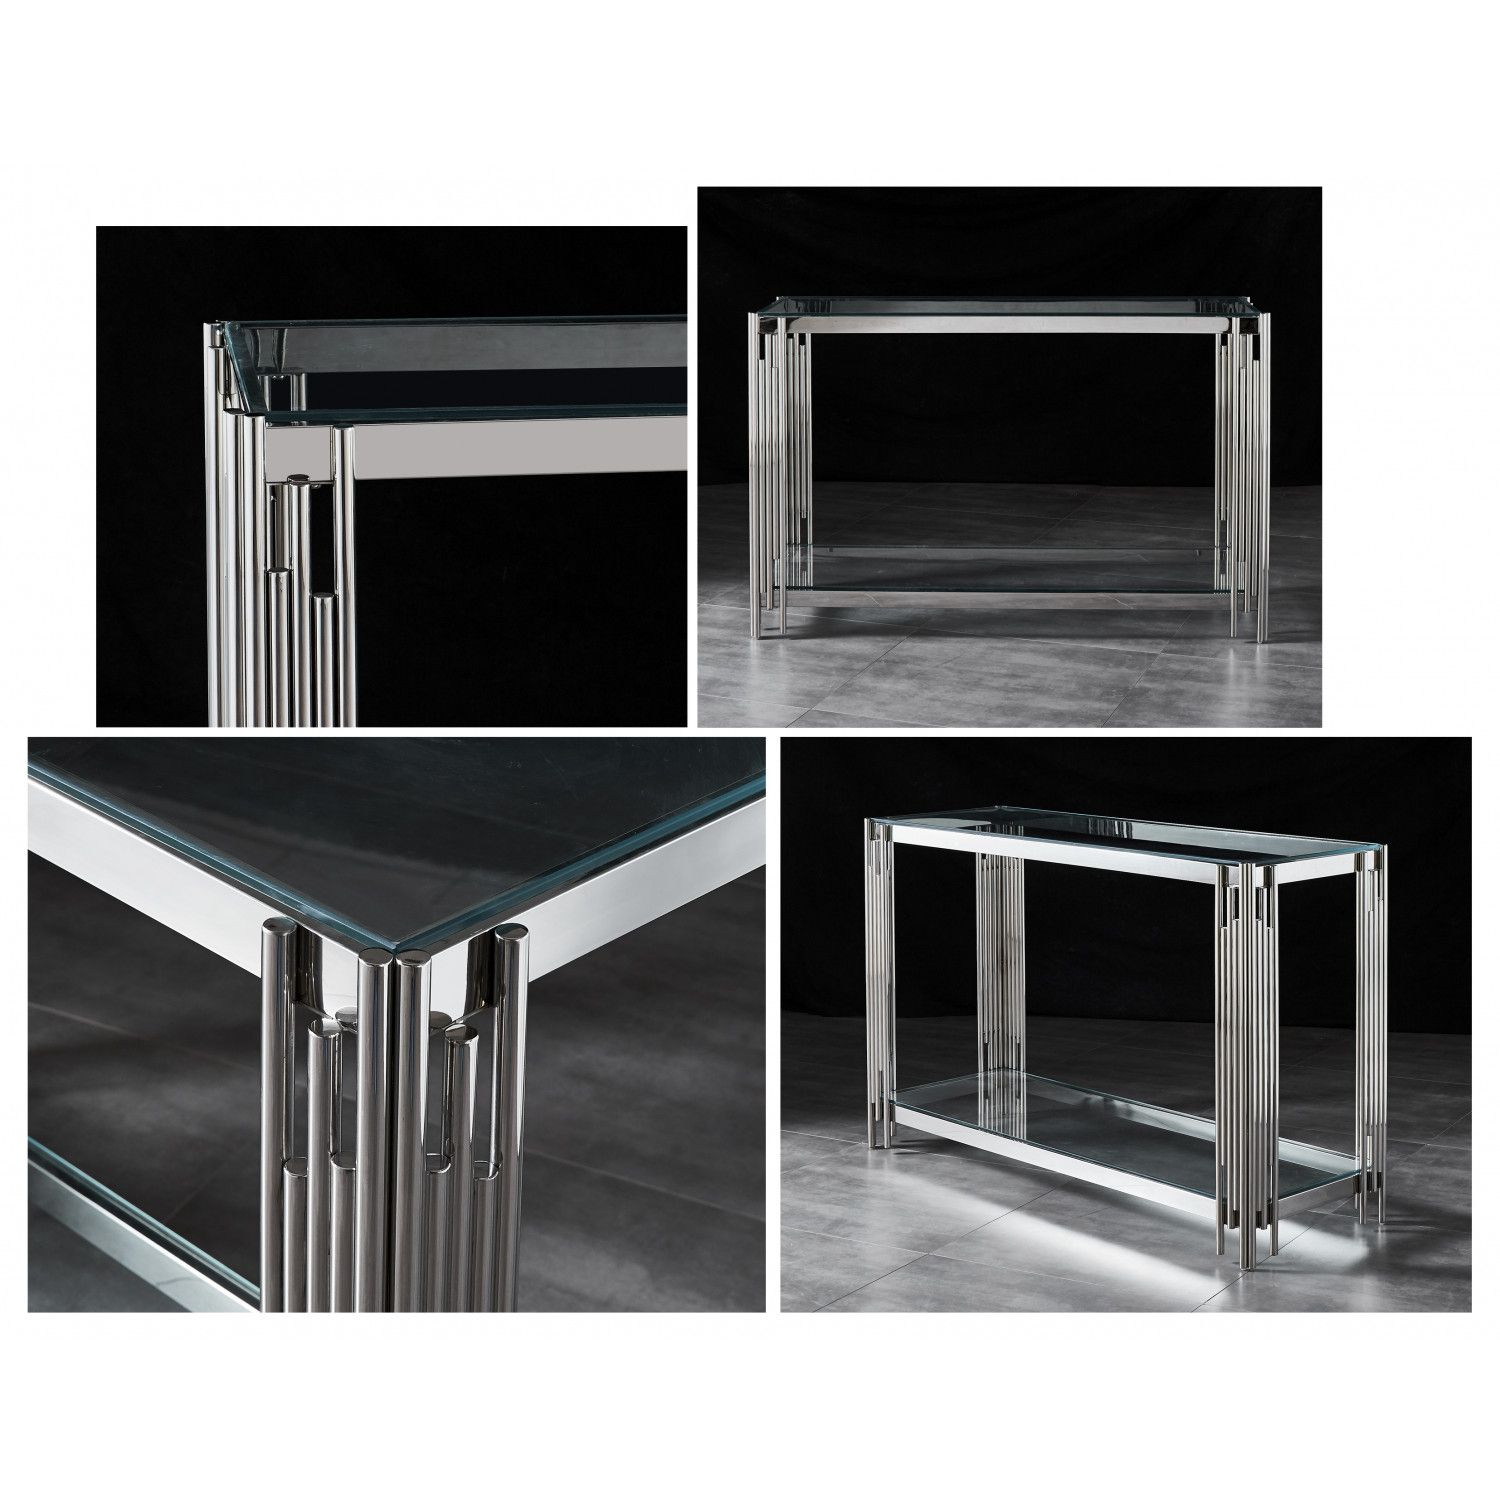 Zara Console Table Stainless Steel And Tempered Glass With Glass And Stainless Steel Console Tables (View 15 of 20)